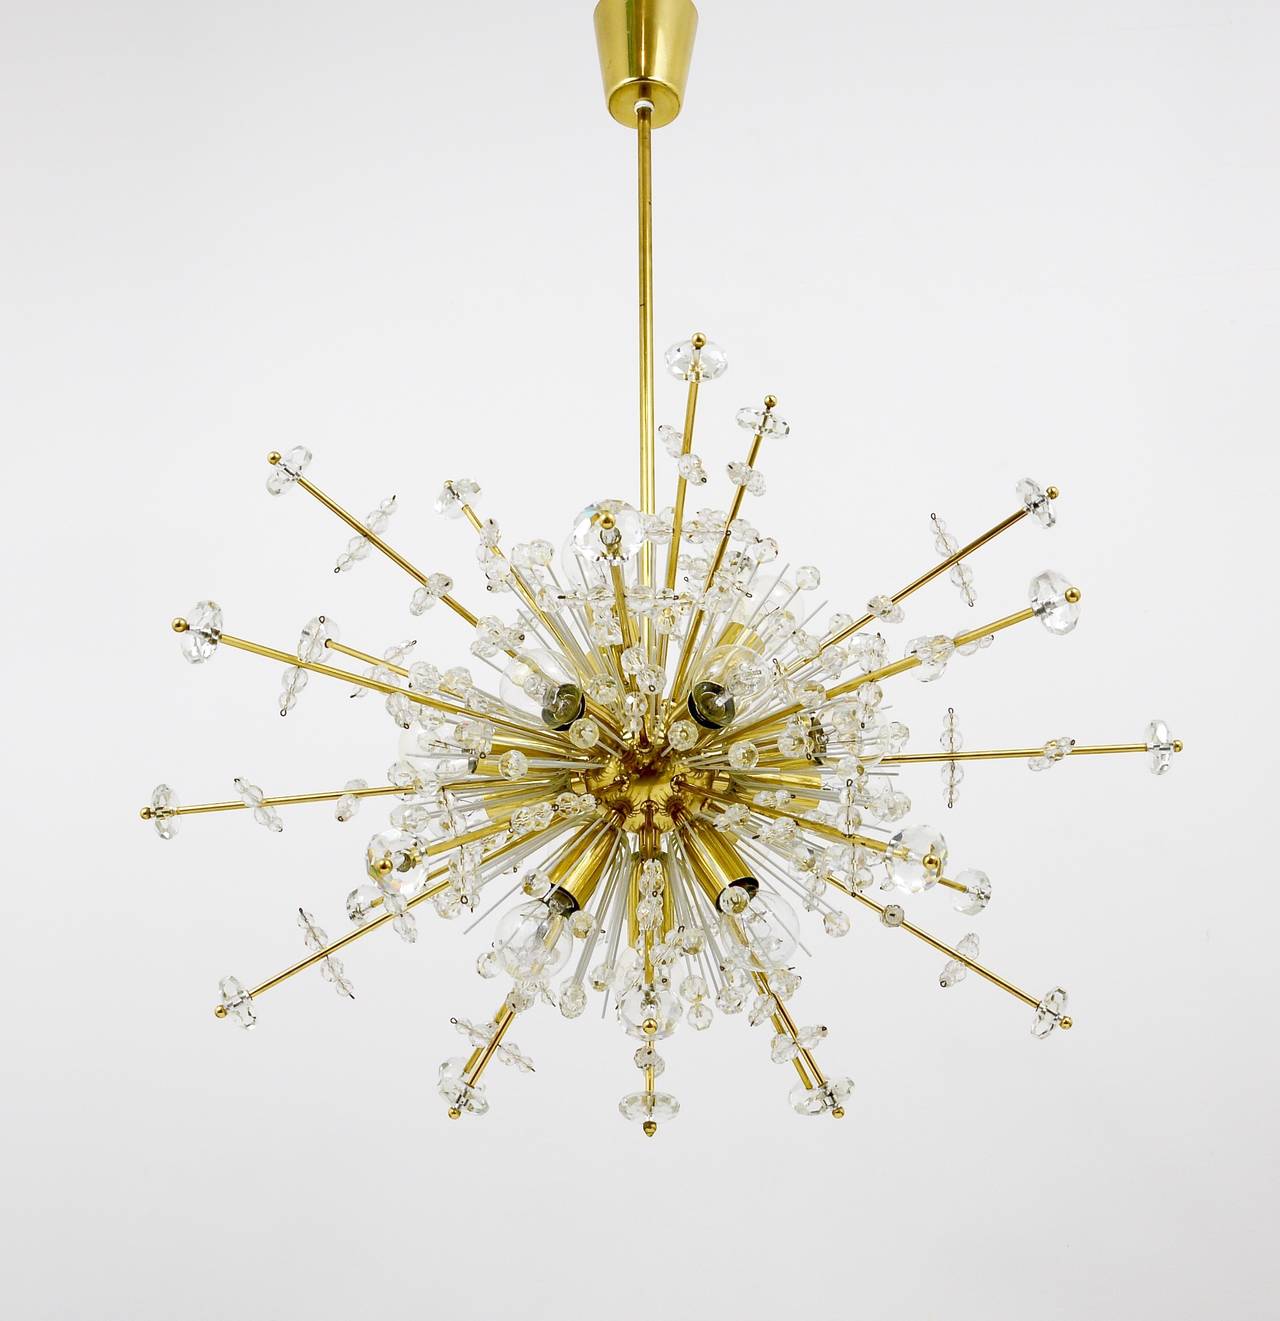 A unique Austrian blowball Sputnik chandelier, designed by Emil Stejnar, designed by Rupert Nikoll, Austria, 1950s. A rare model with long brass rays and a lot of sparkling crystals. It has 14 sockets. In very good condition with marginal patina on